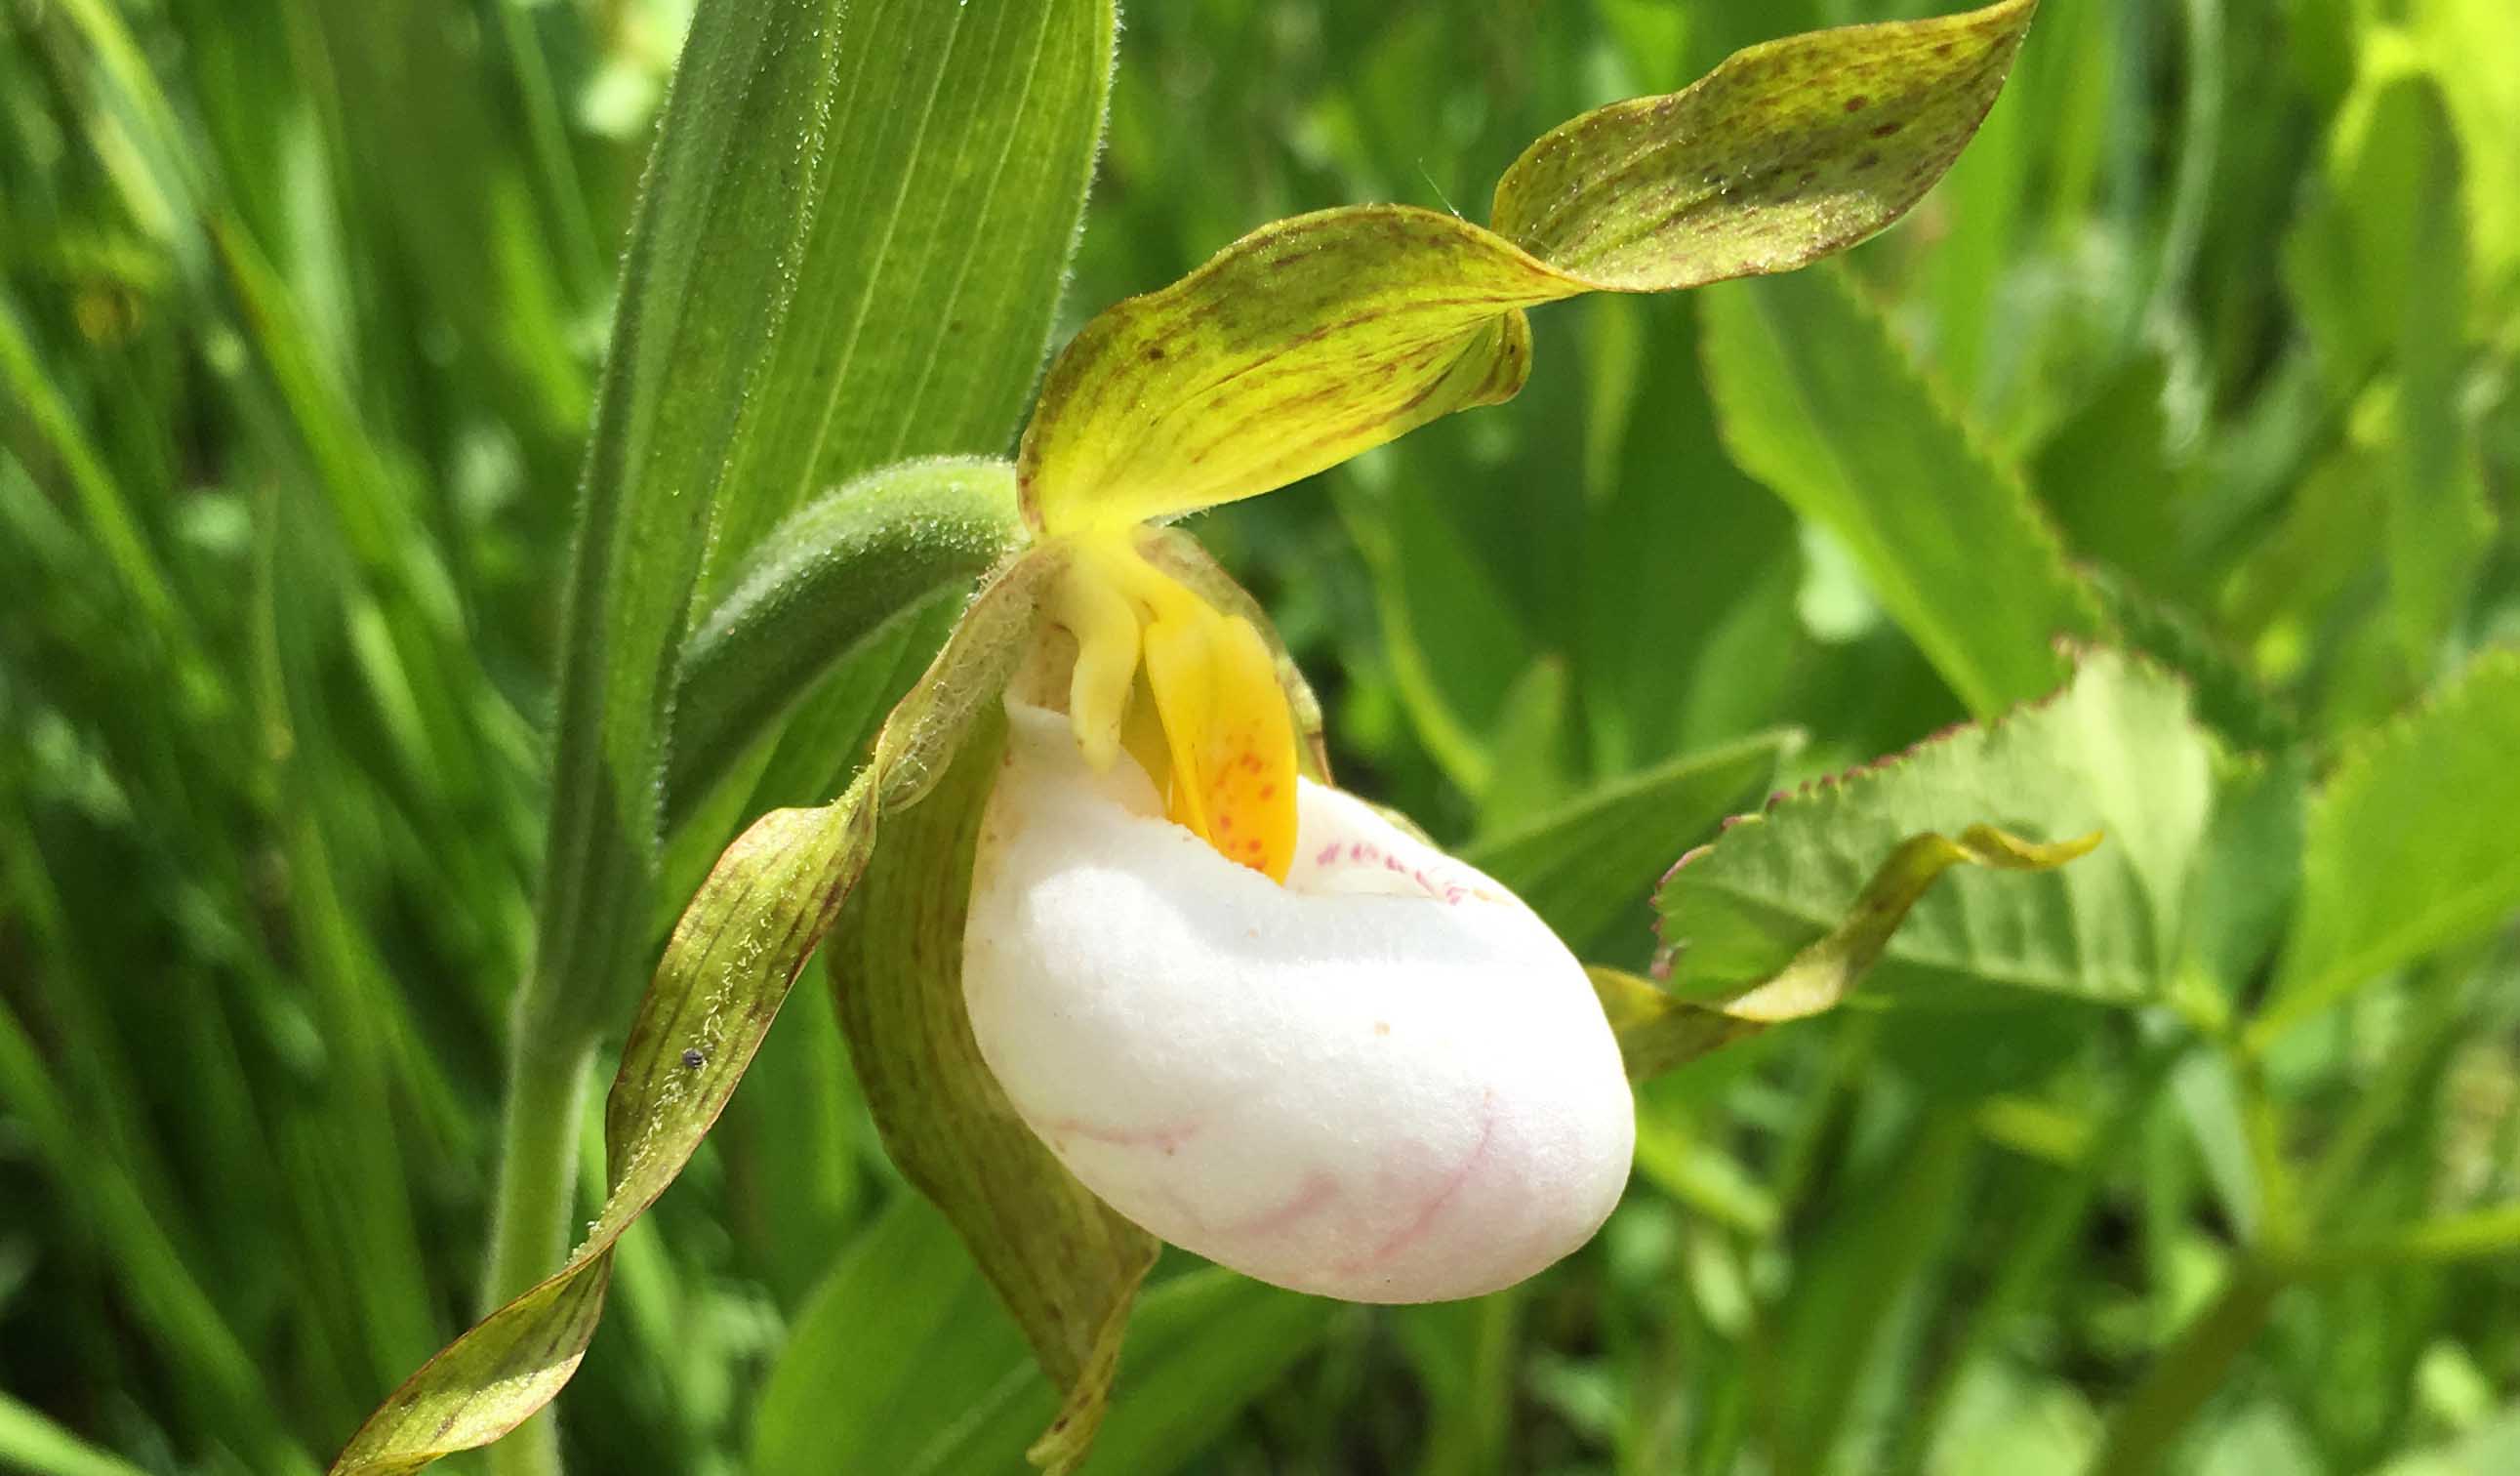 Building on our community roots to help North American orchid conservation